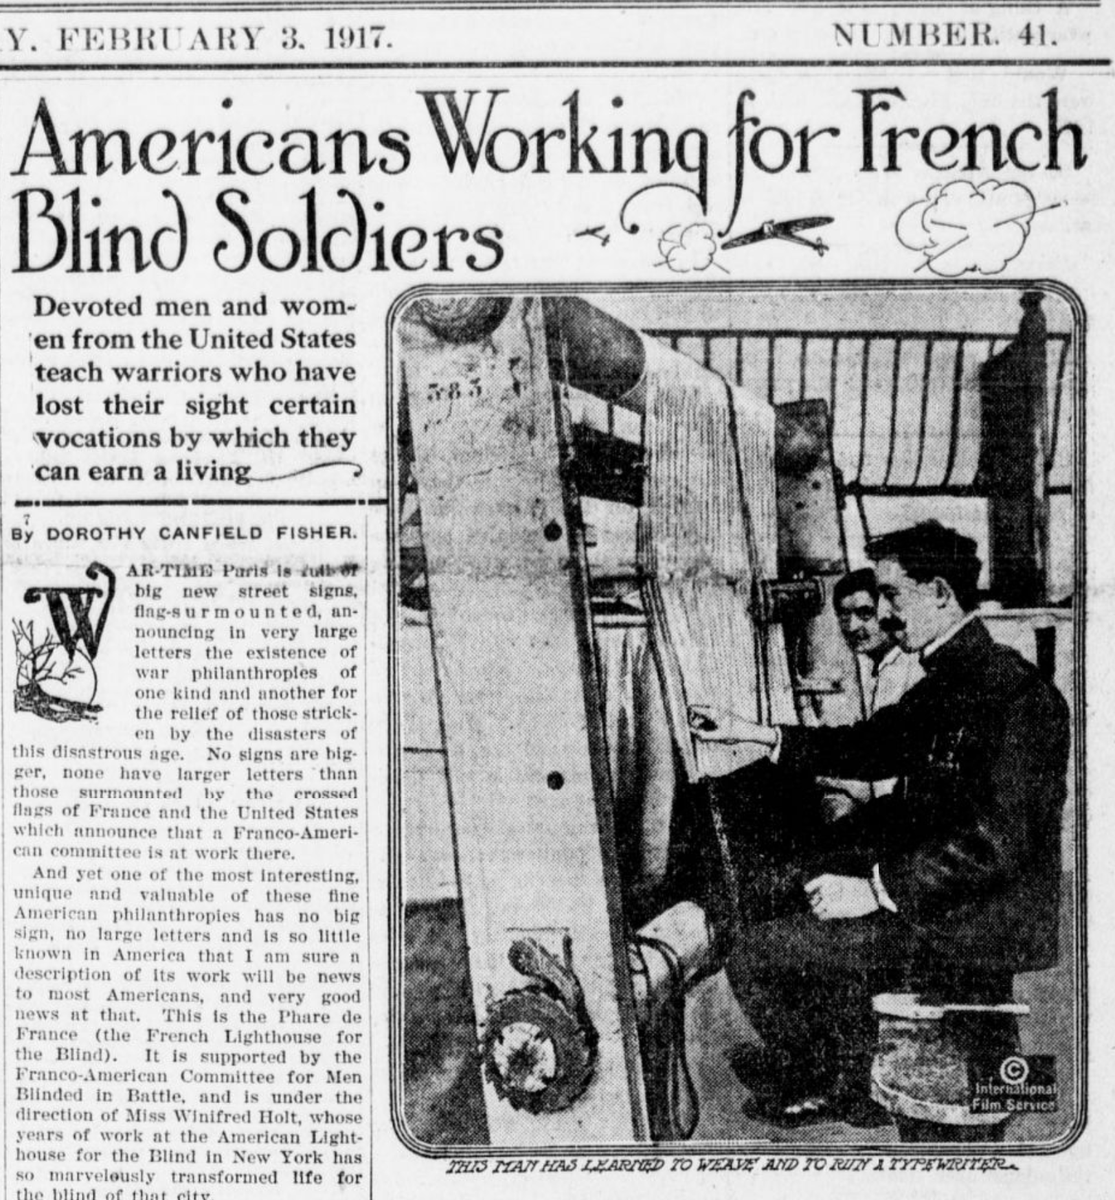 In 1916 the Fishers moved to France to service the Great War. John worked for the ambulance service while Dorothy engaged in relief programs. She established a home for refugee children, a Braille Press for blinded veterans to work &edited a war magazine for disabled soldiers.